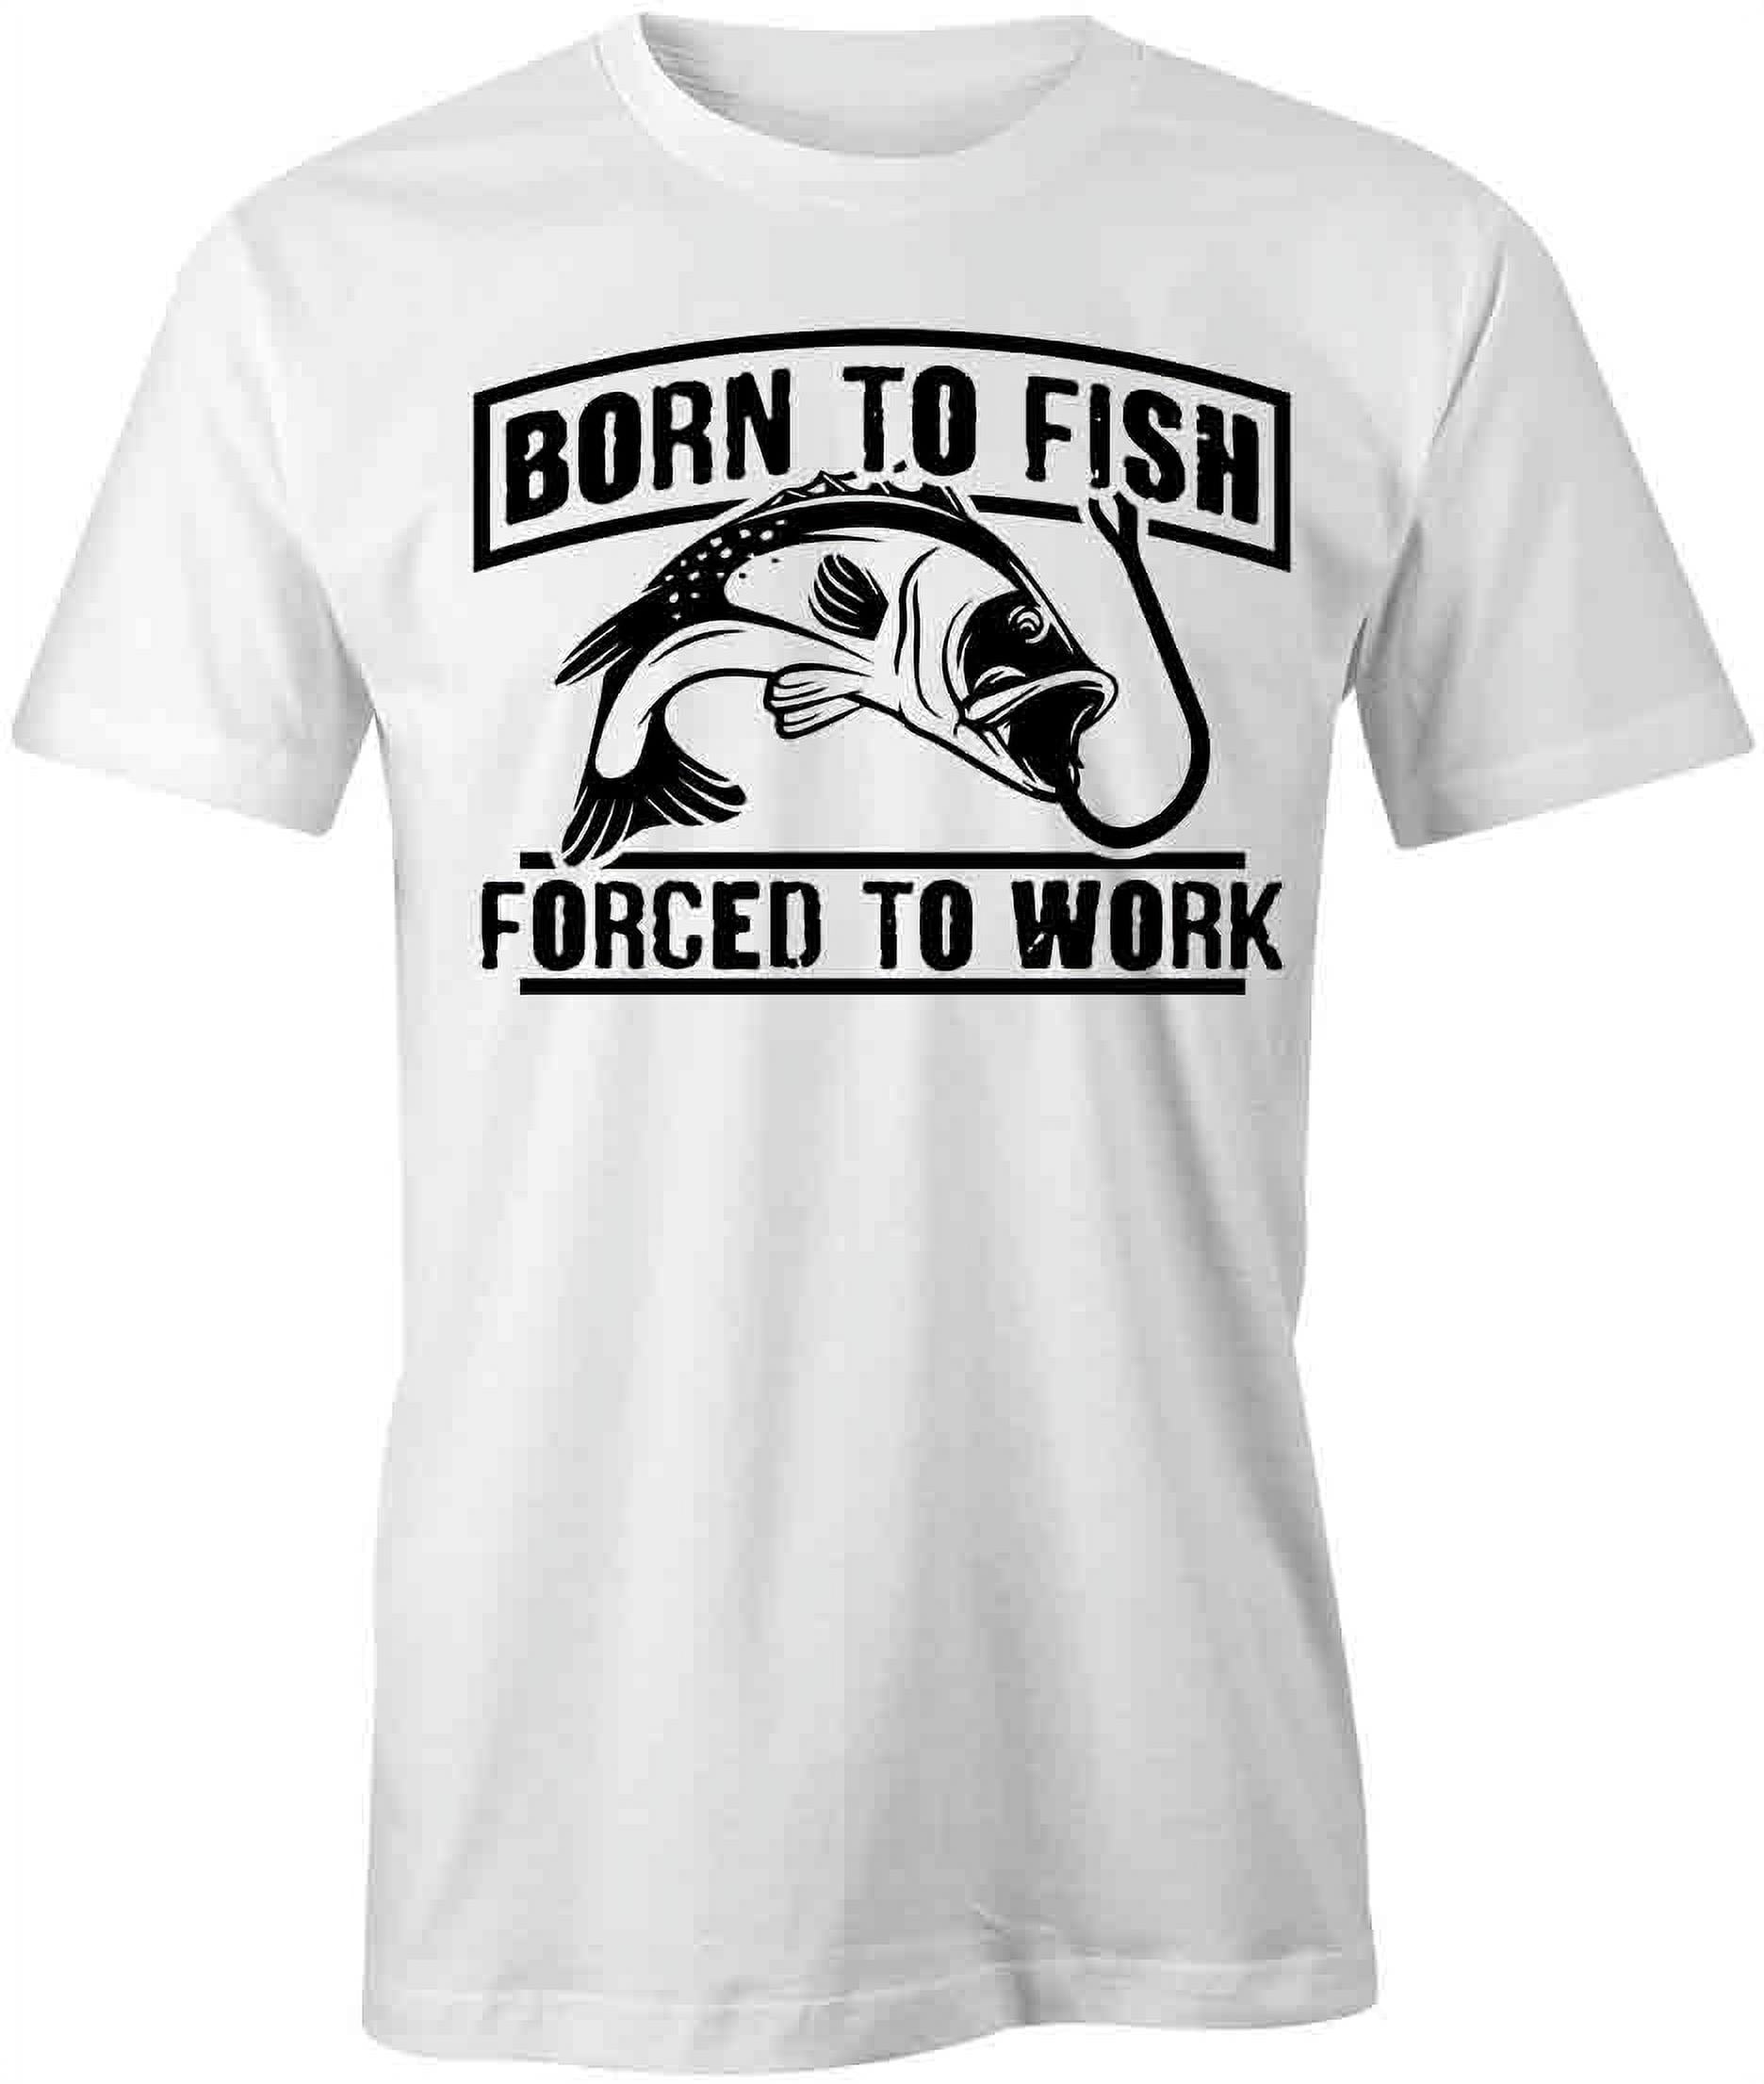 Born To Fish Forced To Work T-Shirt | Funny Fishing White Tee Gift